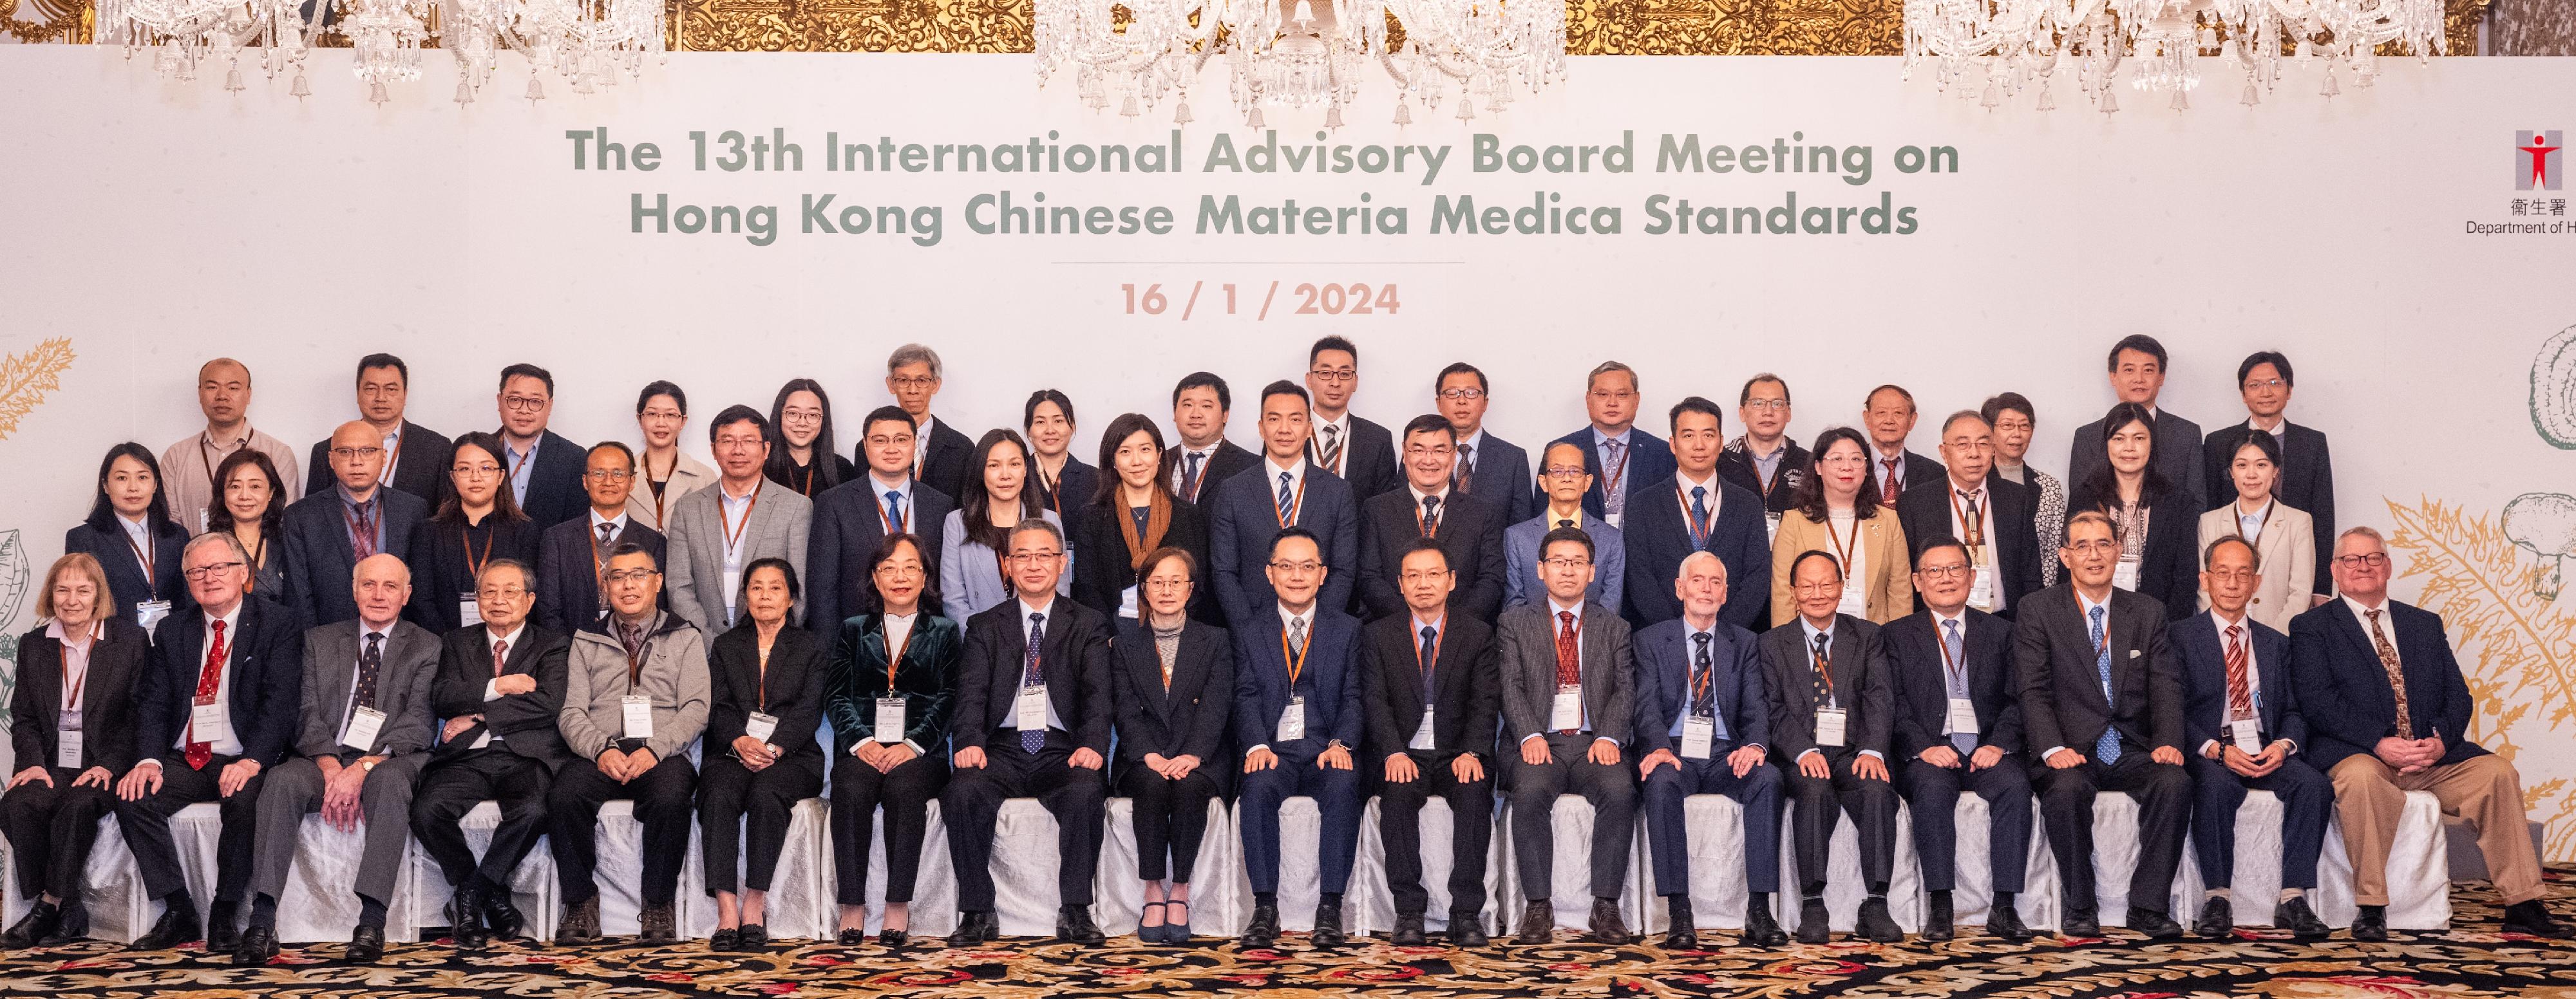 The Department of Health (DH) today (January 16) hosted the 13th Meeting of the International Advisory Board on Hong Kong Chinese Materia Medica Standards in Hong Kong to finalise the setting of reference standards for 13 Chinese Materia Medica commonly used in Hong Kong. Photo shows the Director of Health, Dr Ronald Lam (front row, ninth right); the Controller of Regulatory Affairs of the DH, Dr Amy Chiu (front row, ninth left); the Government Chemist, Dr Lee Wai-on (front row, eighth right); and the Deputy Secretary General of the Chinese Pharmacopoeia Commission, Professor Ma Shuangcheng (front row, eighth left), together with other participants of the meeting. 